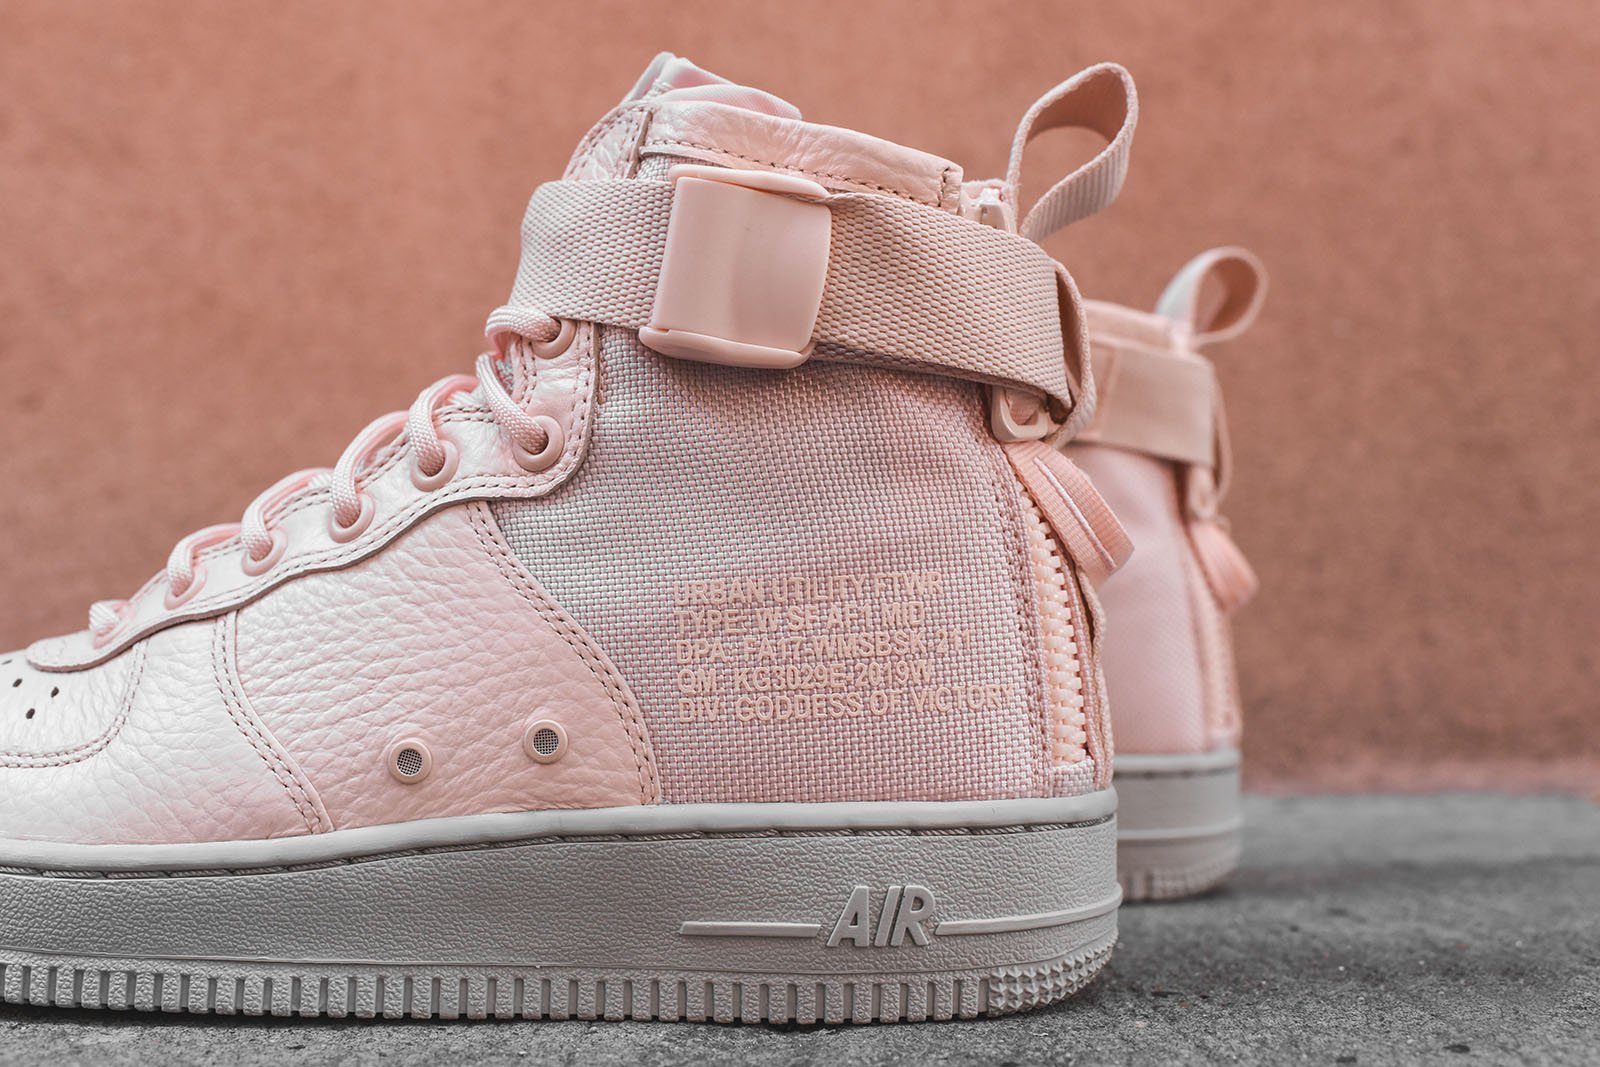 Nike Rolls Out A Women's SF Air Force 1 Boot In The Prettiest Of Pinks